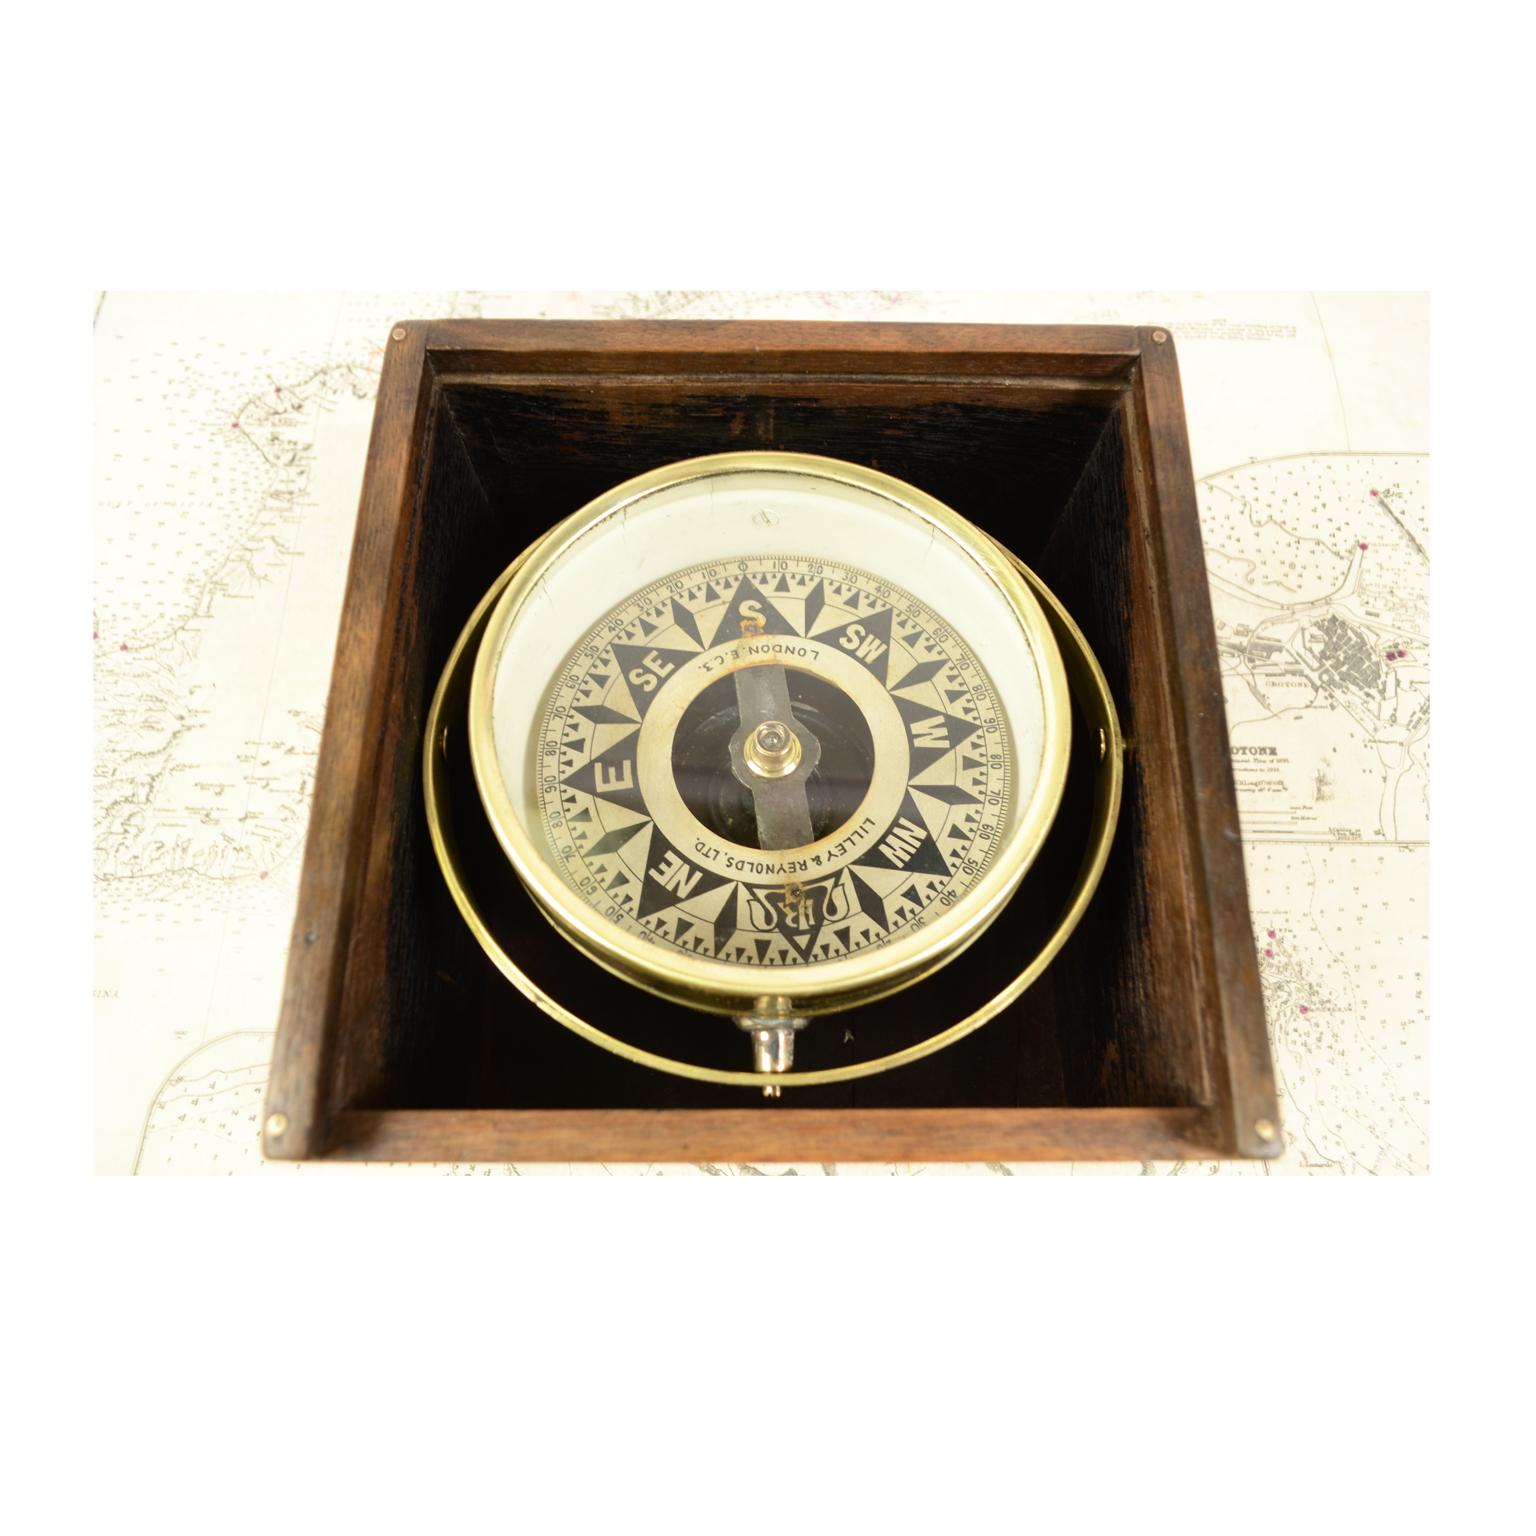 Magnetic dry compass of the 1930s, on universal joint, in its original wooden box complete with slot lid, signed LILLEY & REYNOLDS Ltd London, firm born from the merging between John Lilley & Son, firm founded in 1812 and Reynolds and Son Dobbie &